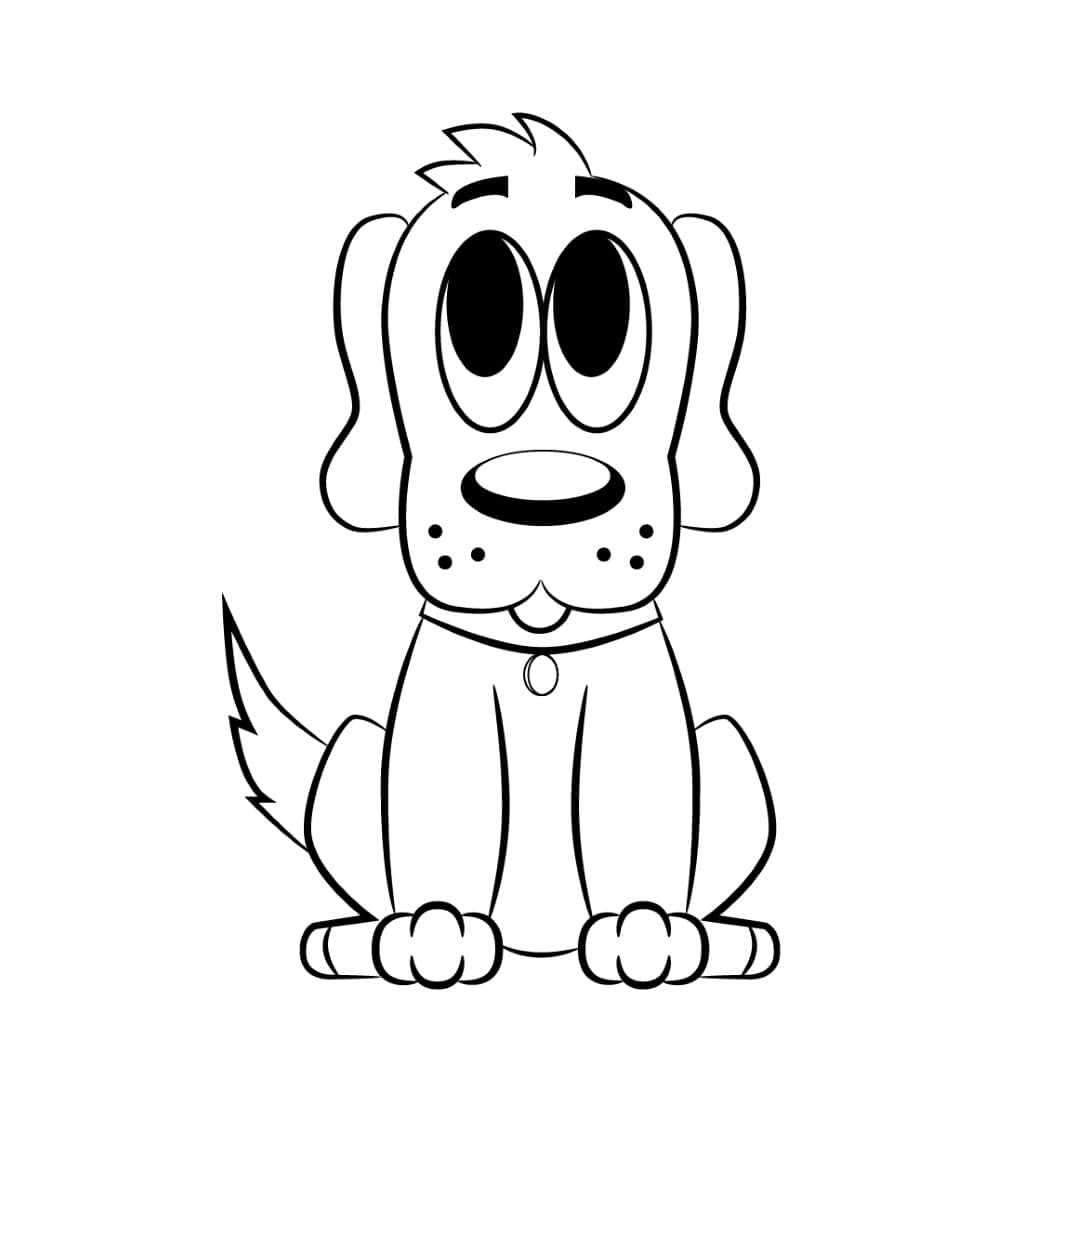 A Cartoon Dog Coloring Page